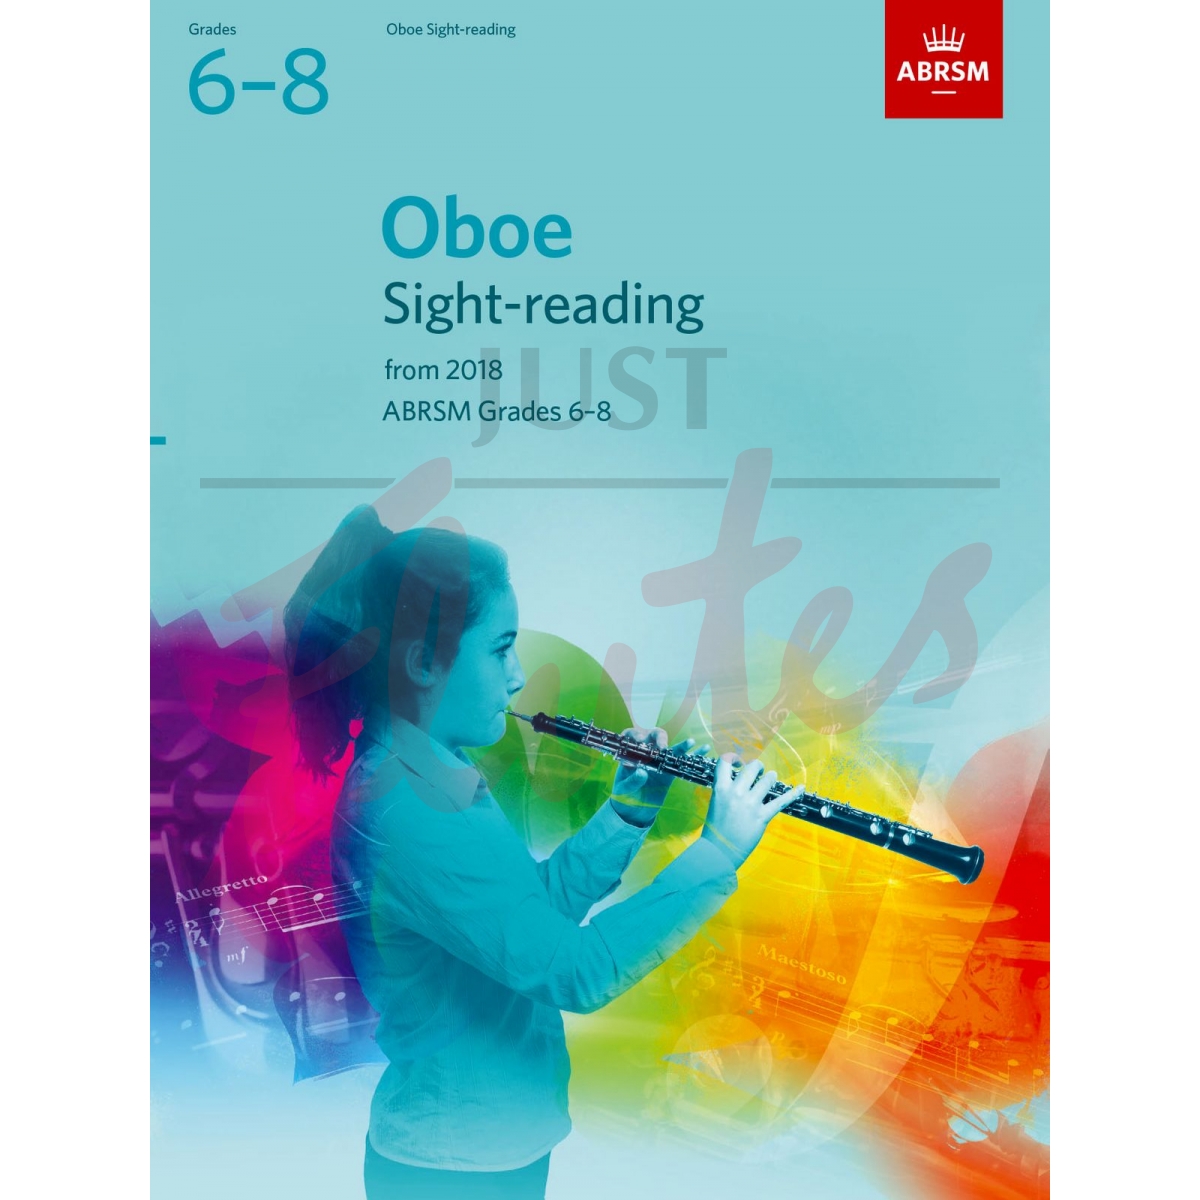 Sight-Reading Tests Grades 6-8 (from 2018) [Oboe]